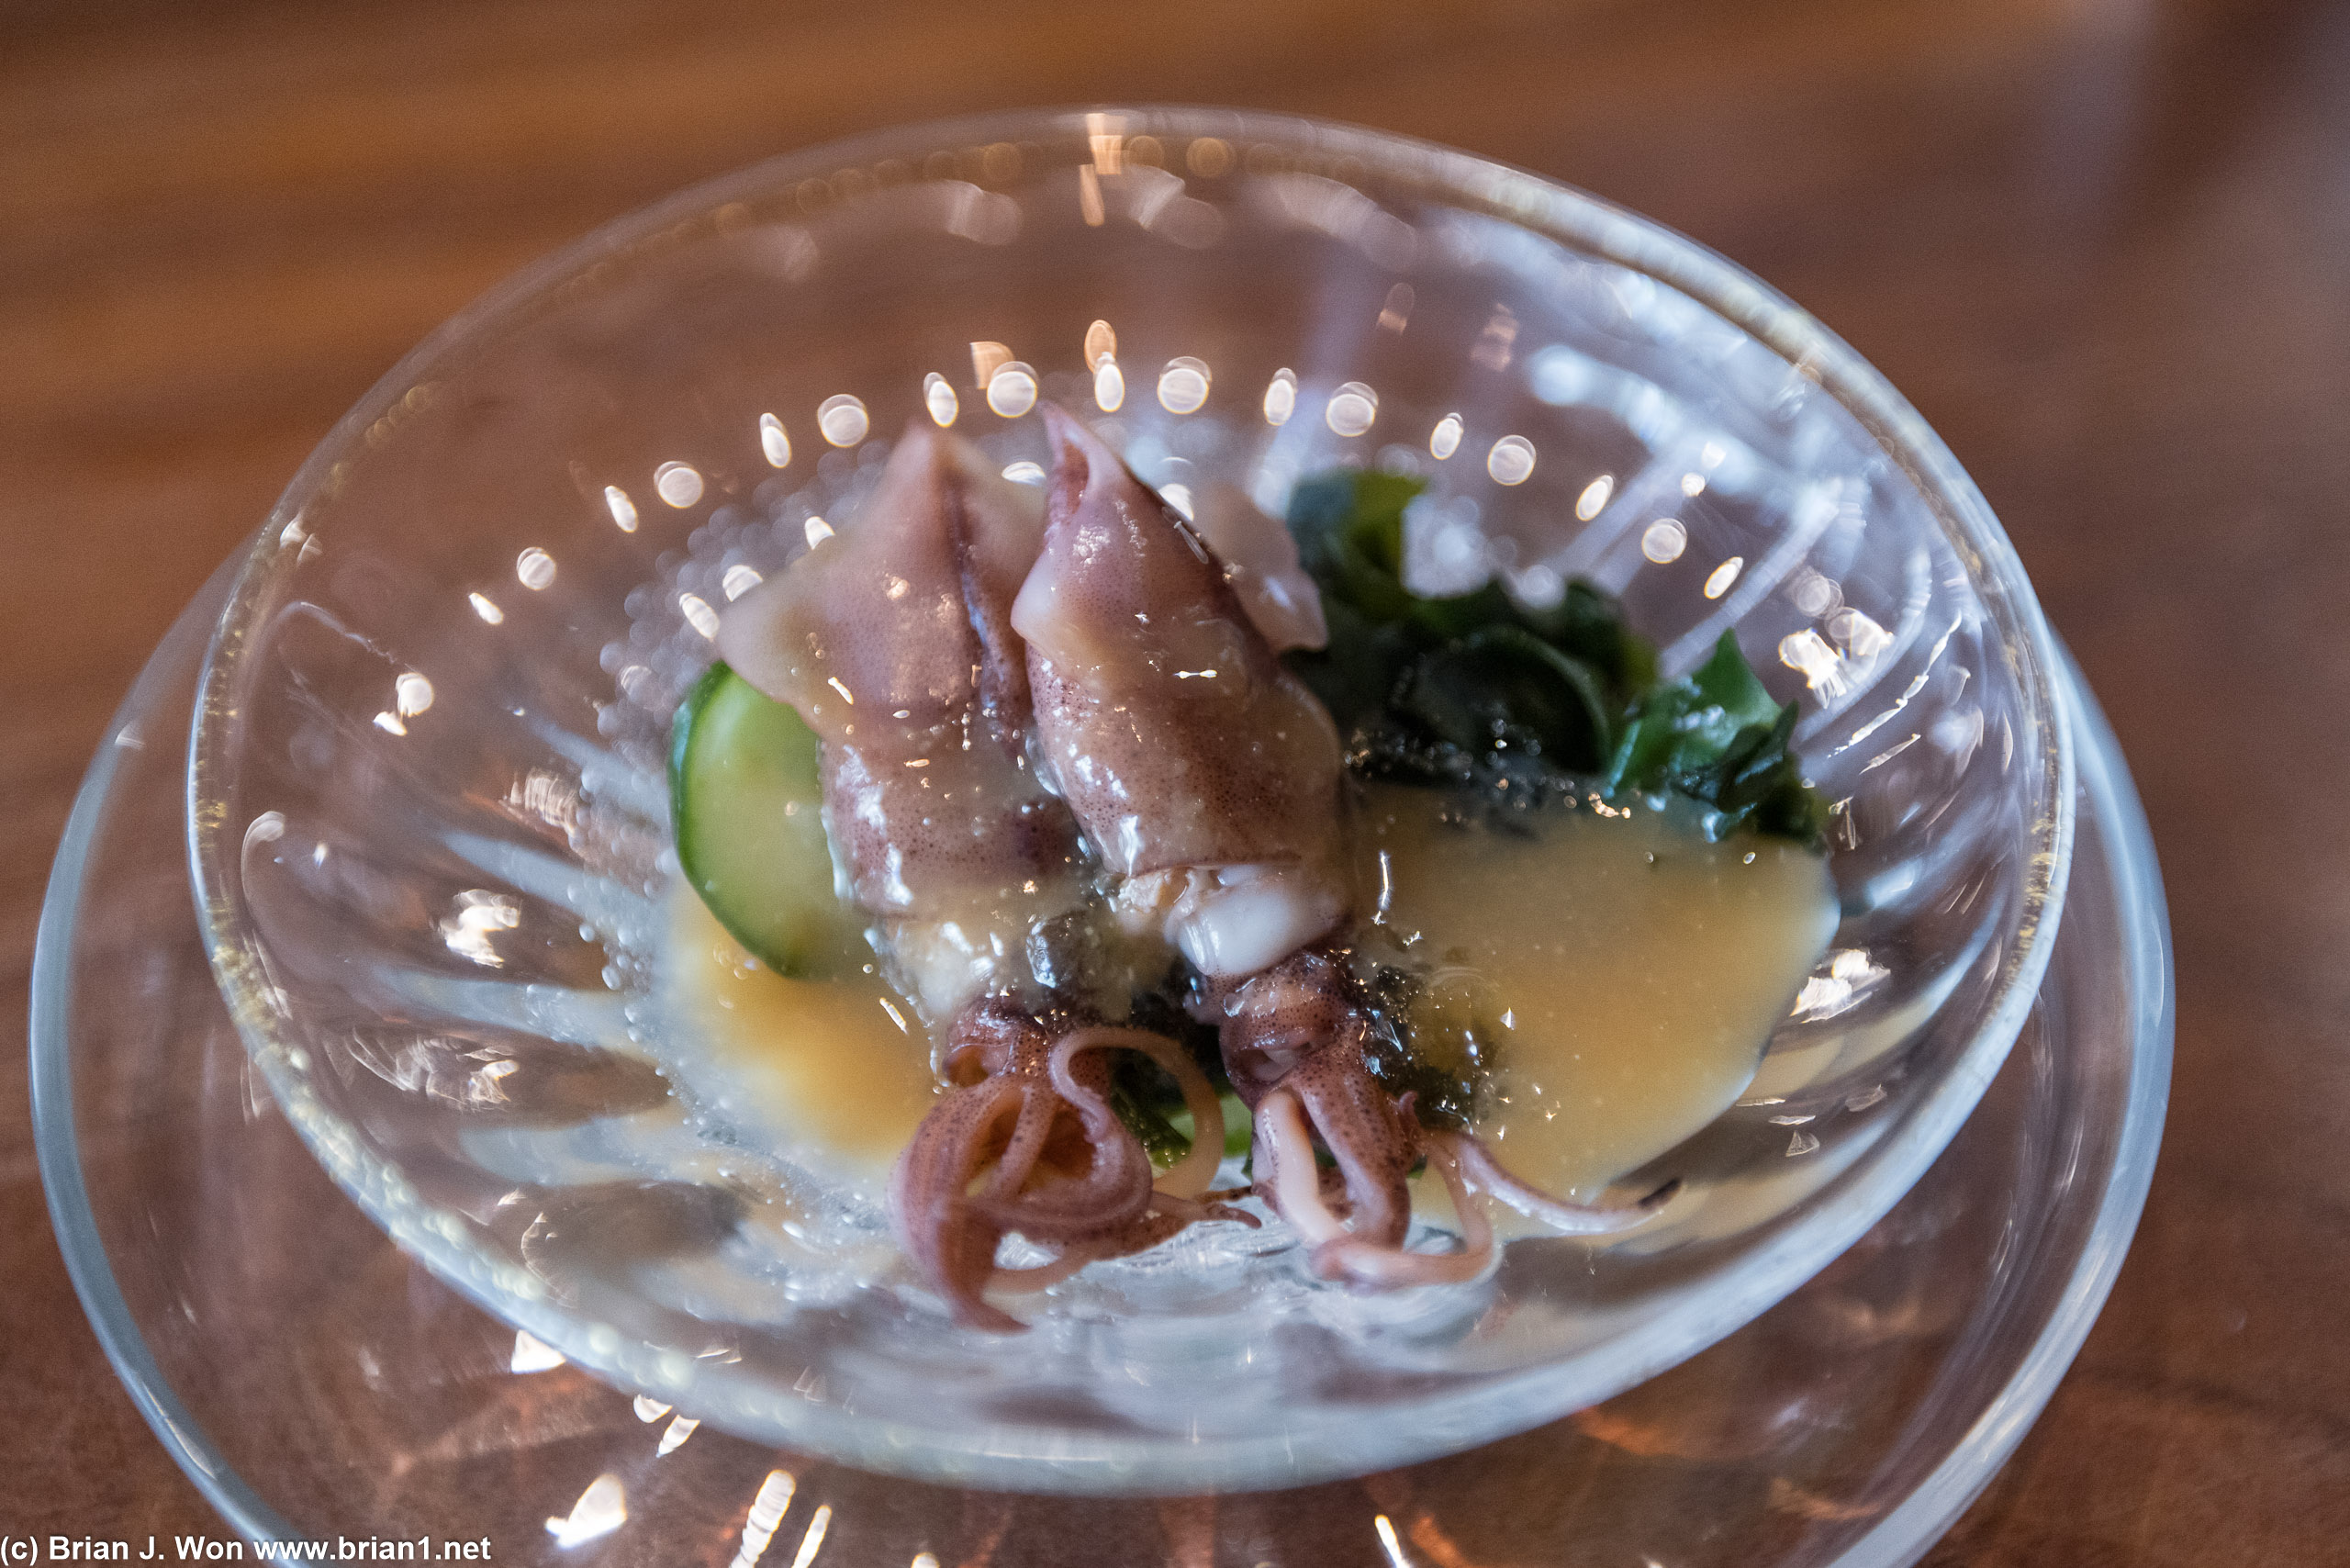 Tail end of firefly squid season. Firefly squid, pickled cucumbers, daishi miso, seaweed, vinegarette, some other stuff.